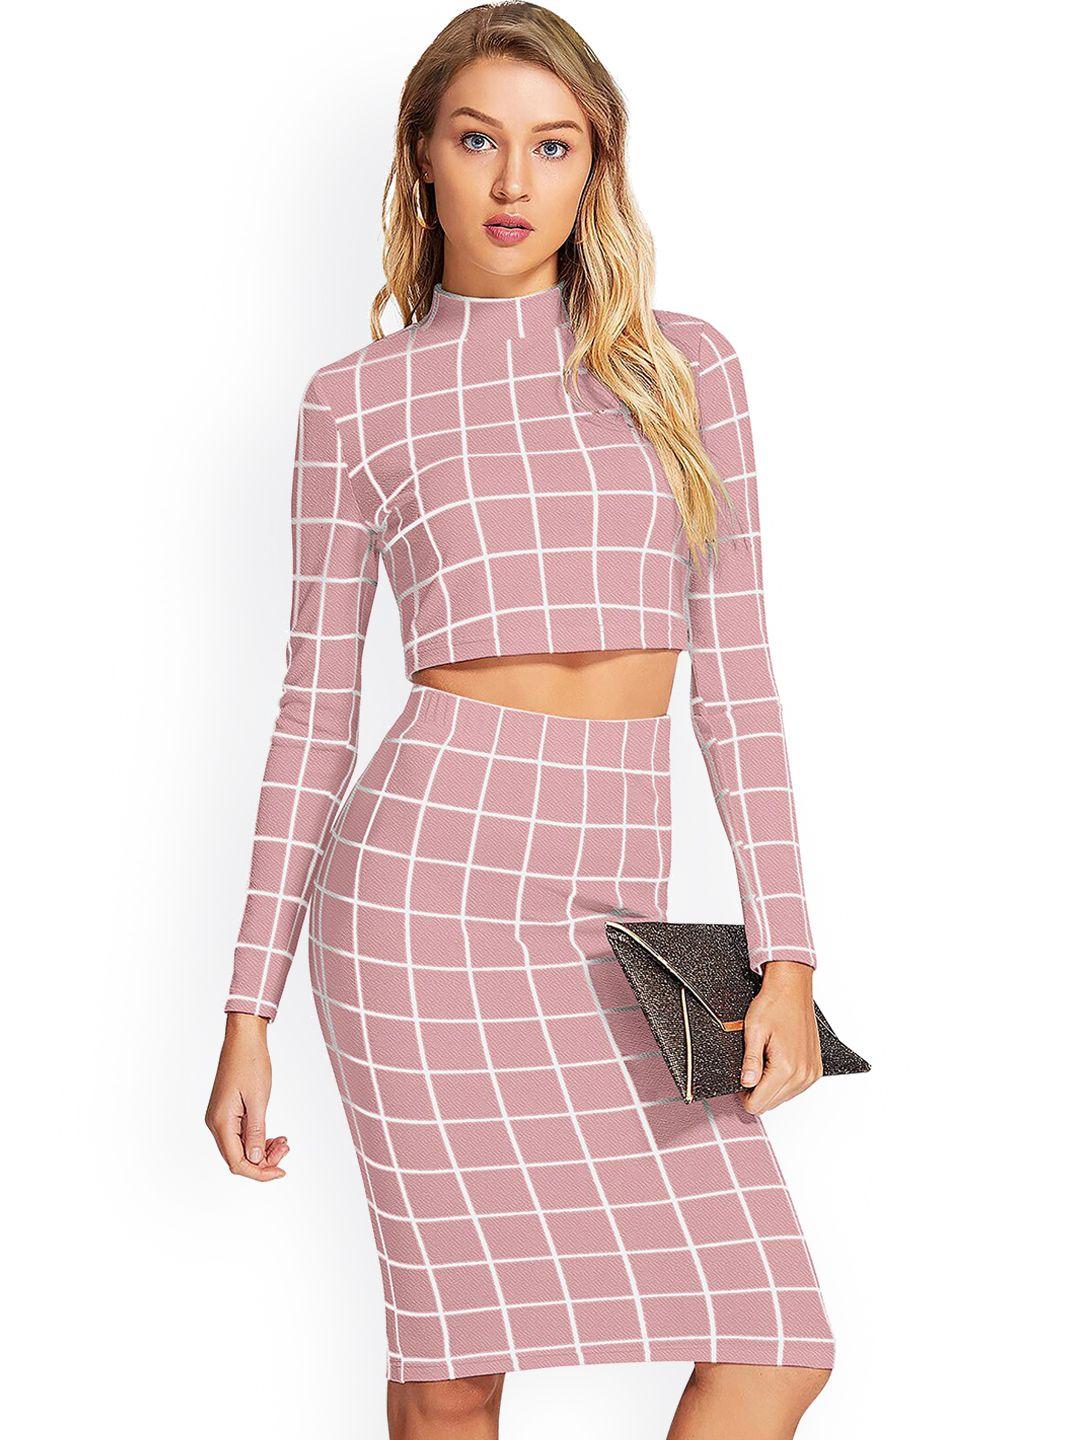 baesd checked crop top with skirt co-ords